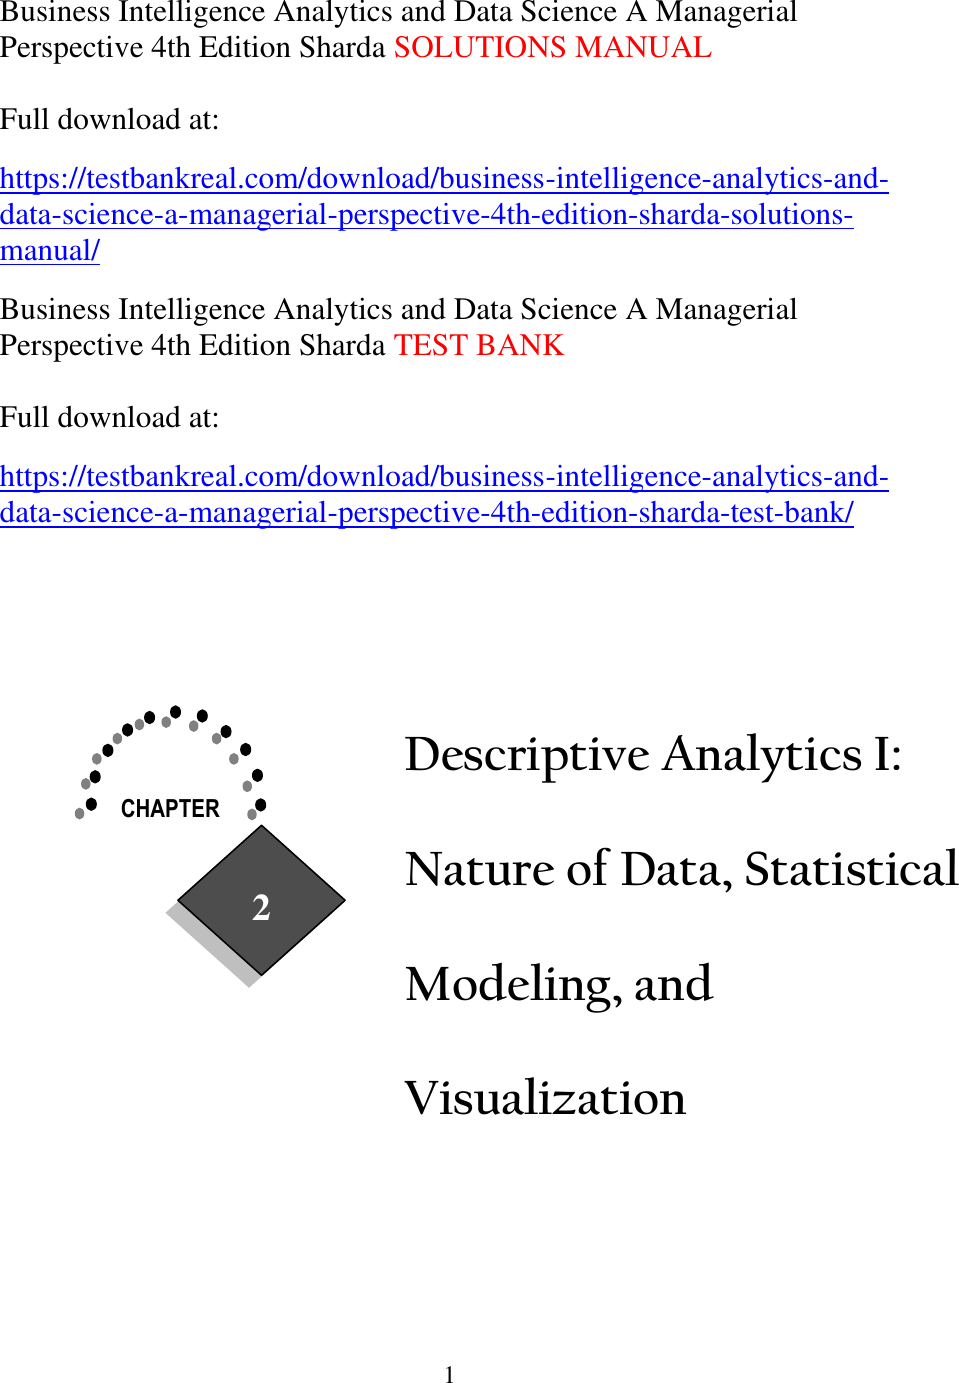 Business Intelligence Analytics And Data Science A Managerial Perspective 4th Edition Sharda